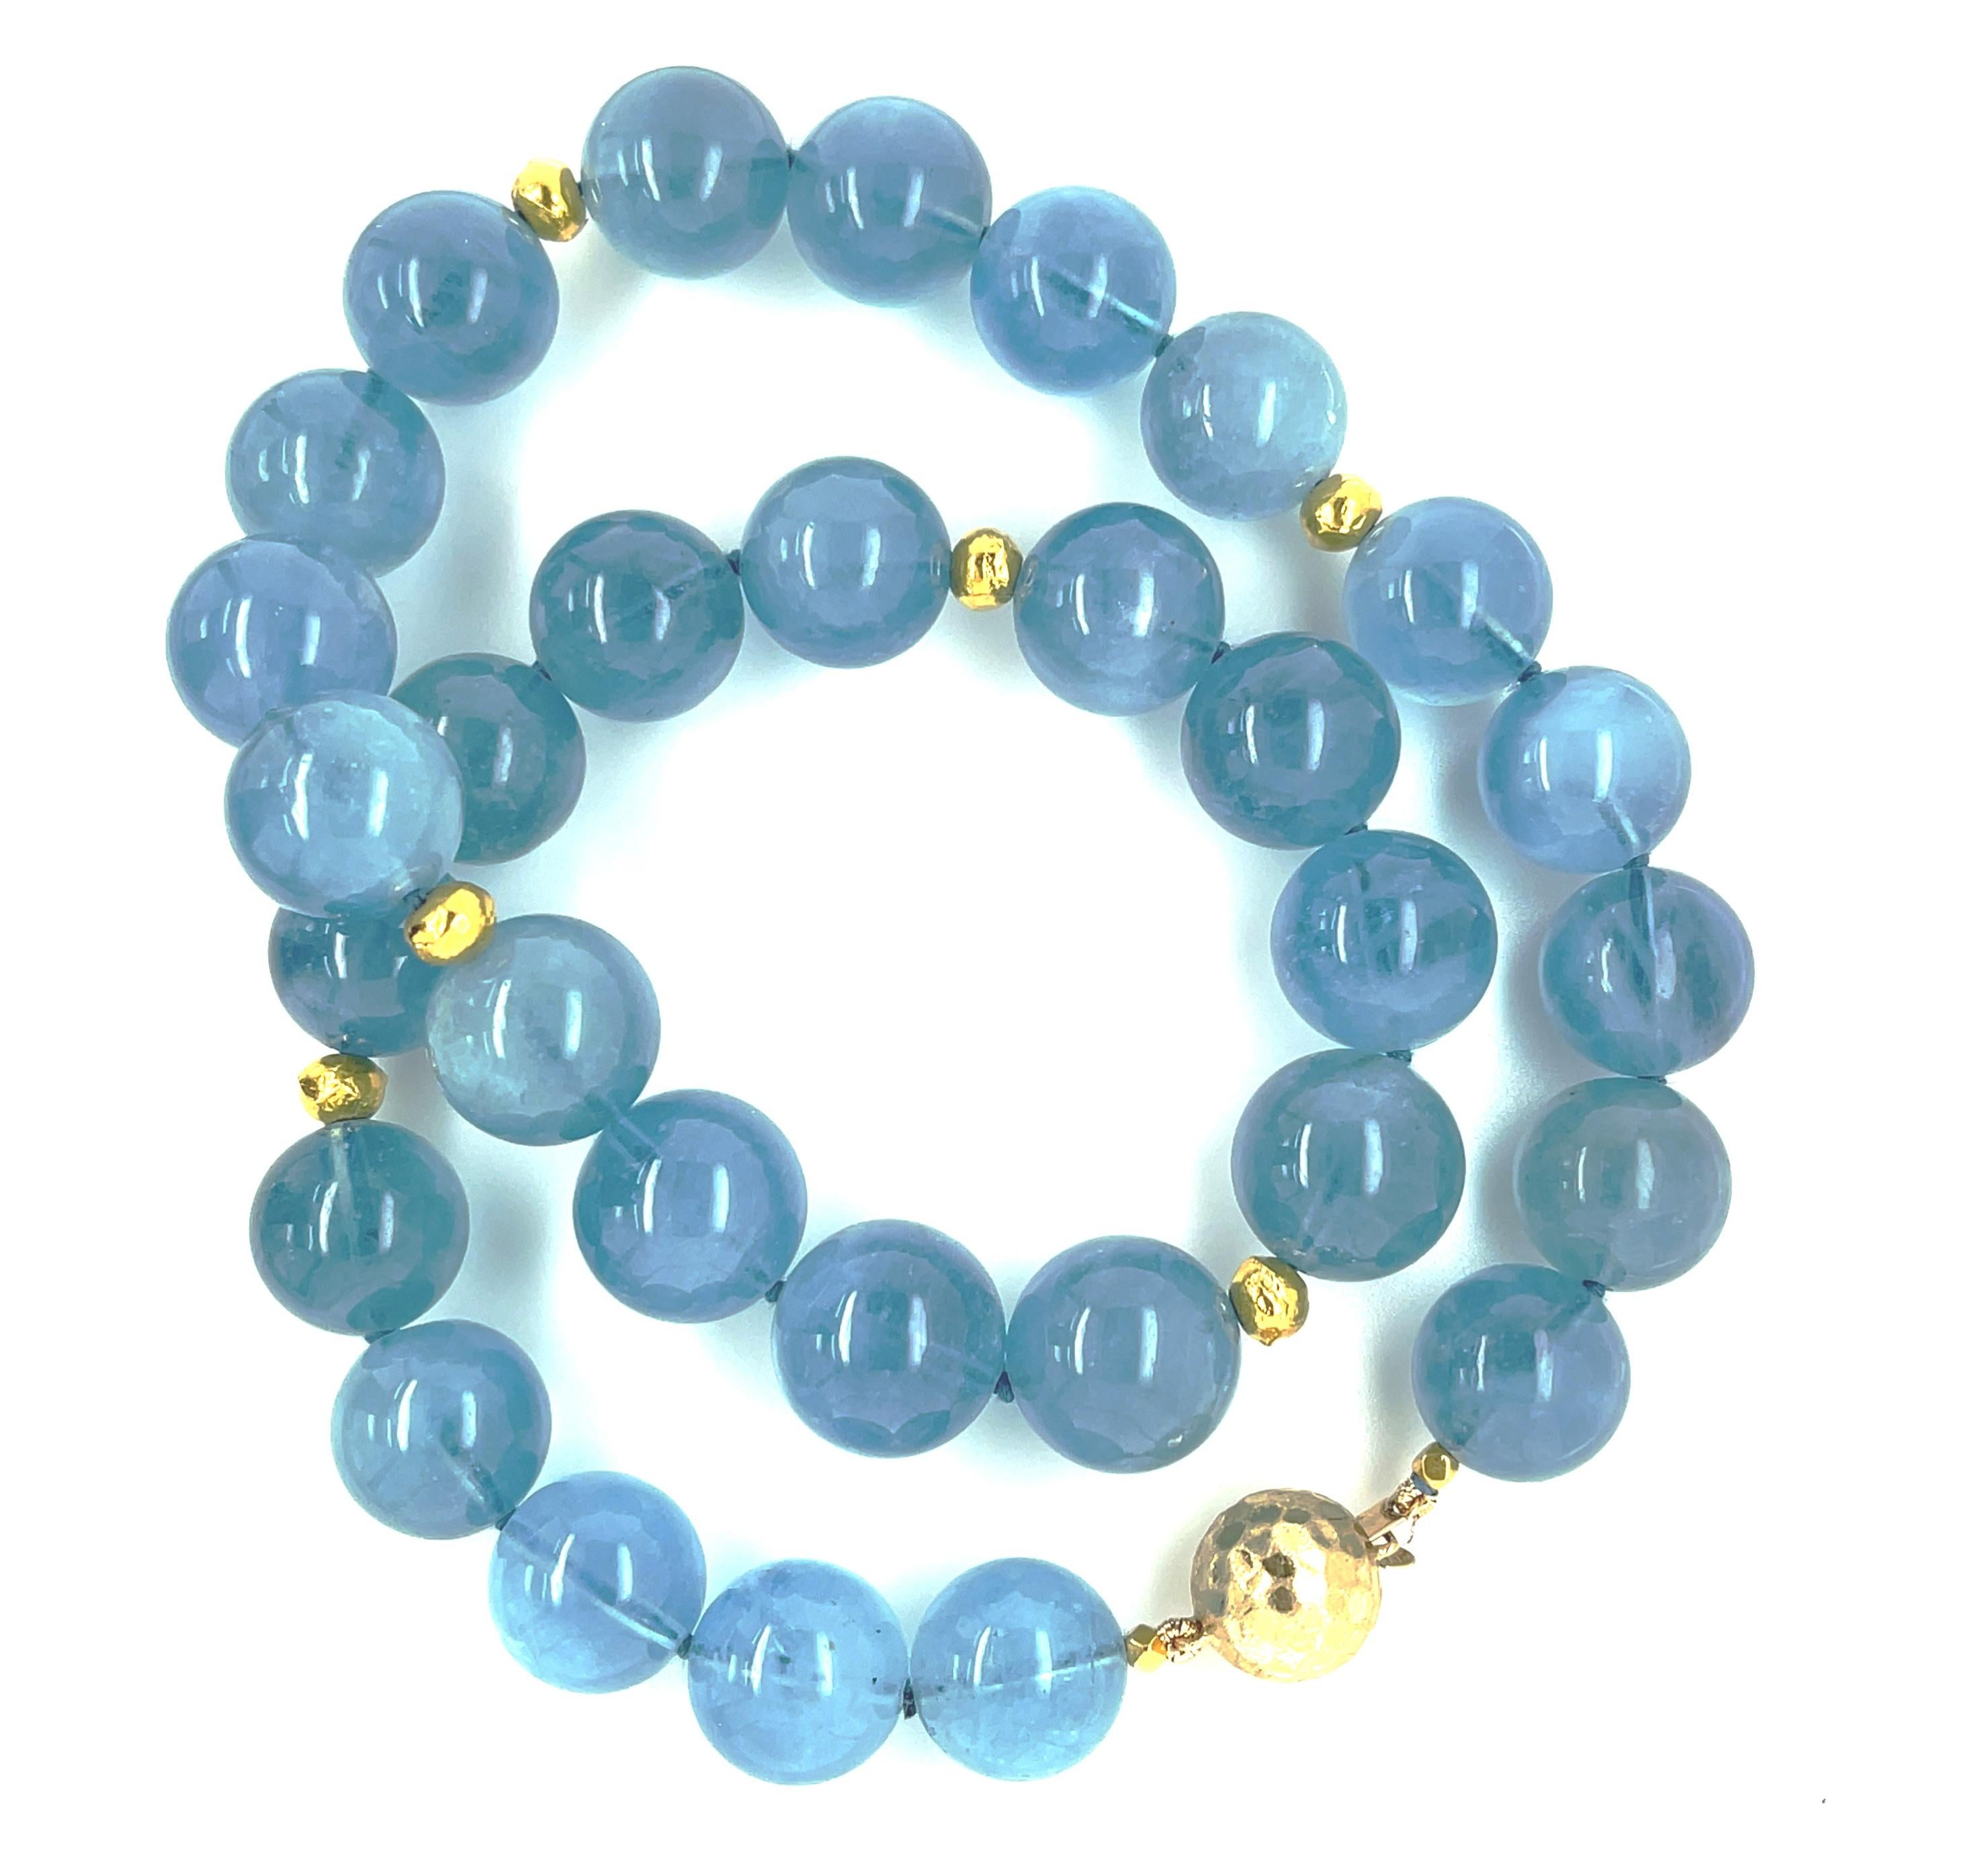 14 to 15mm Round Aquamarine Bead Necklace with Yellow Gold Accents, 18.5 Inches In New Condition For Sale In Los Angeles, CA